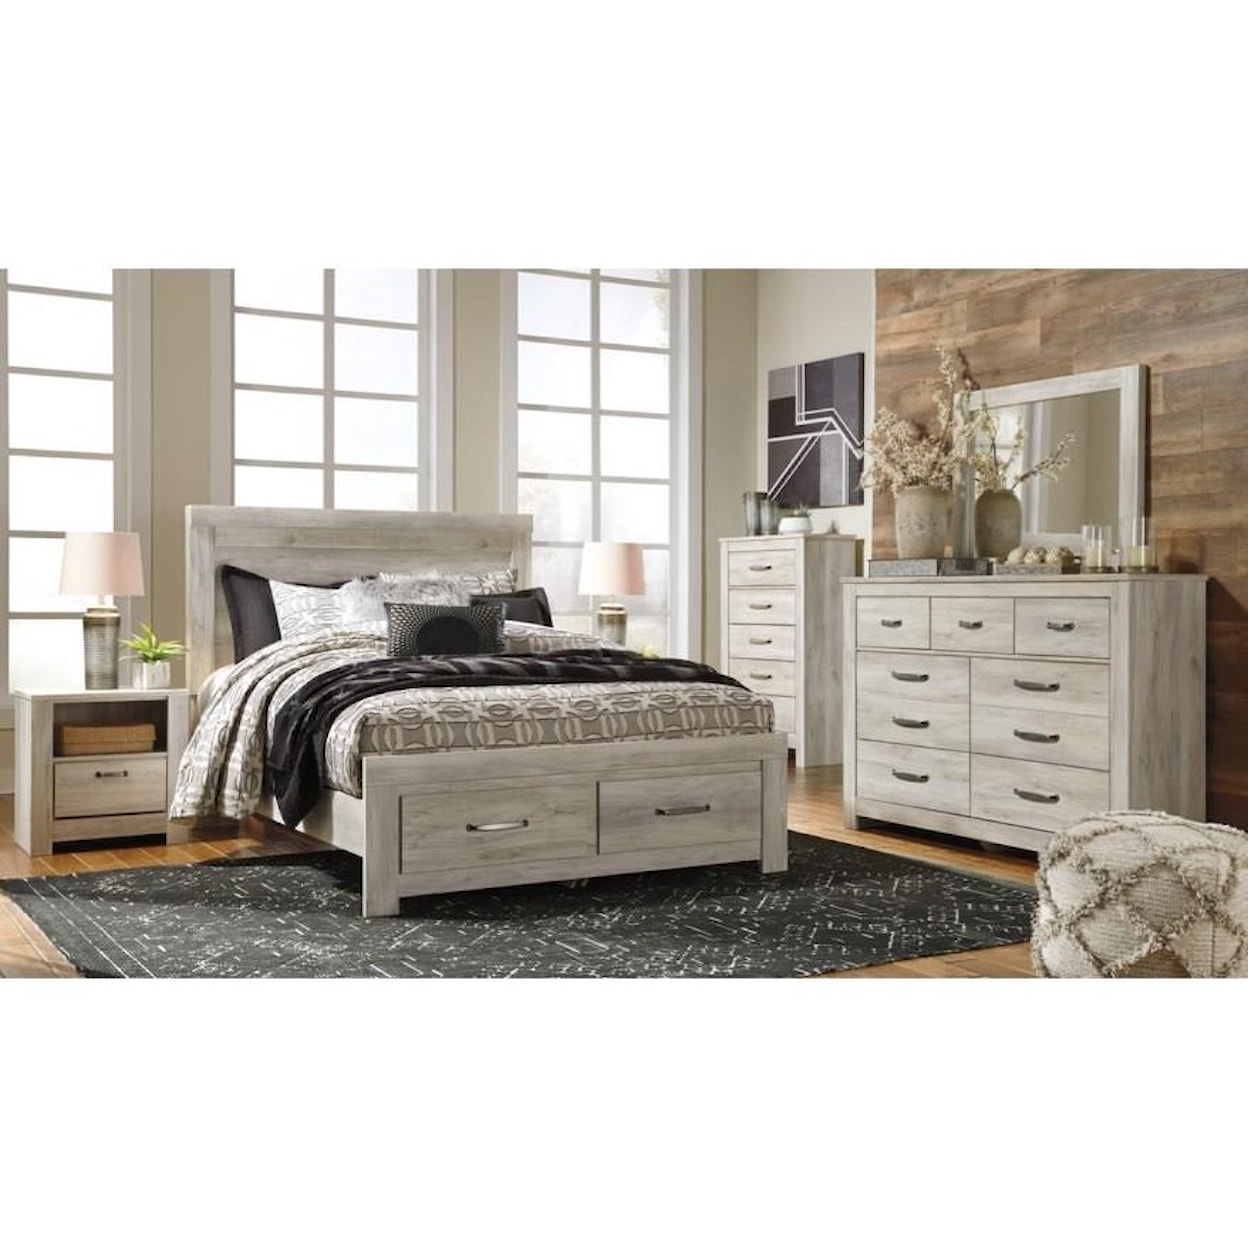 Signature Design by Ashley Bellaby 5PC Queen Bedroom Group